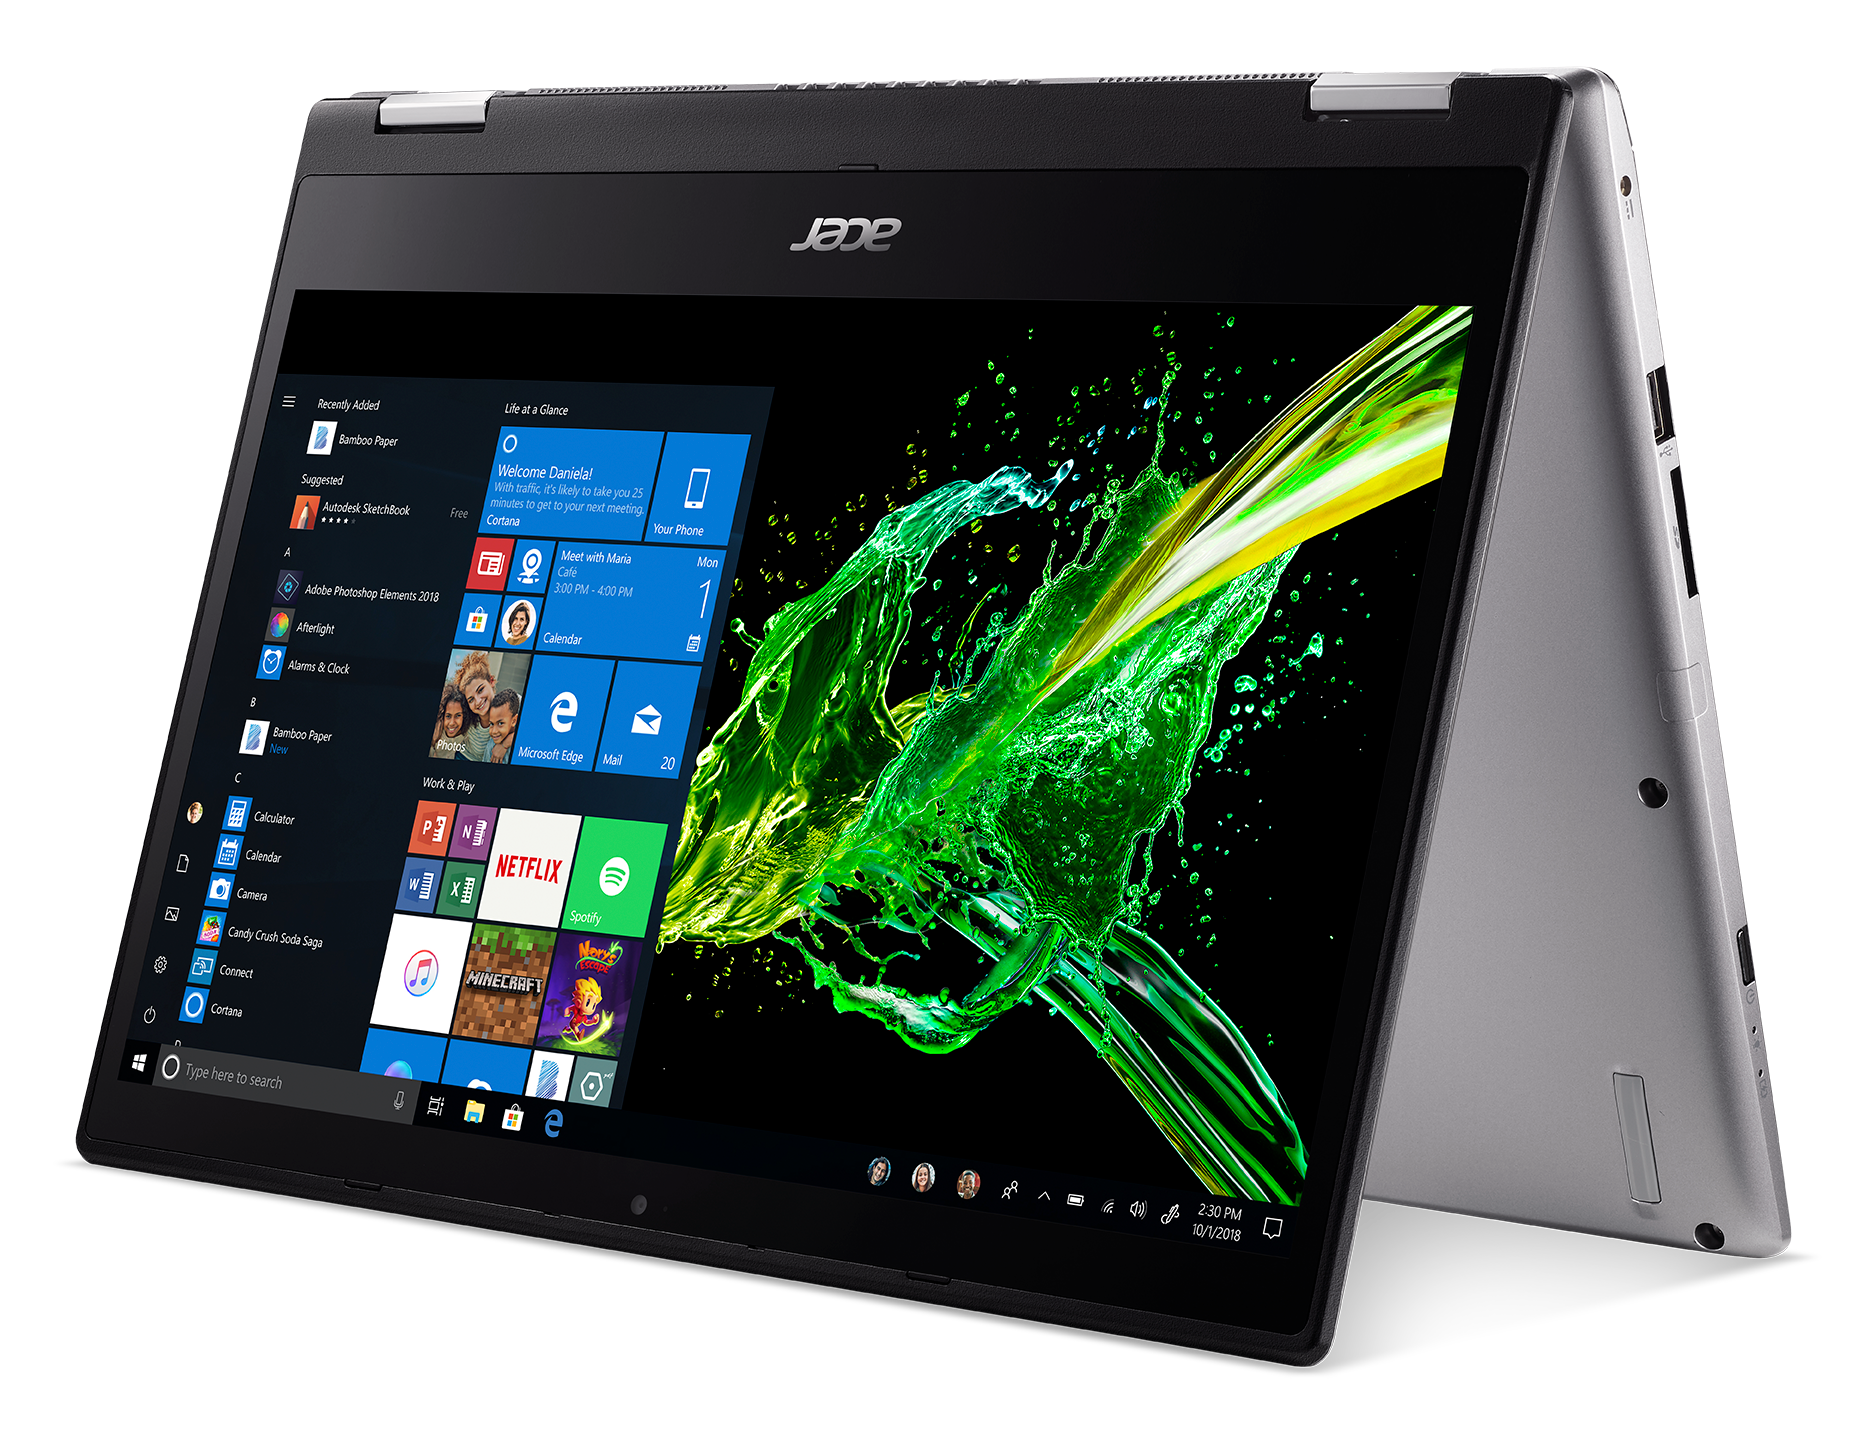 Acer spin купить. Acer Spin 3. Acer Spin 3 n17ws. Ноутбук-трансформер Acer Spin 3 sp314-51-p4ll. Acer Spin 12v67rc.